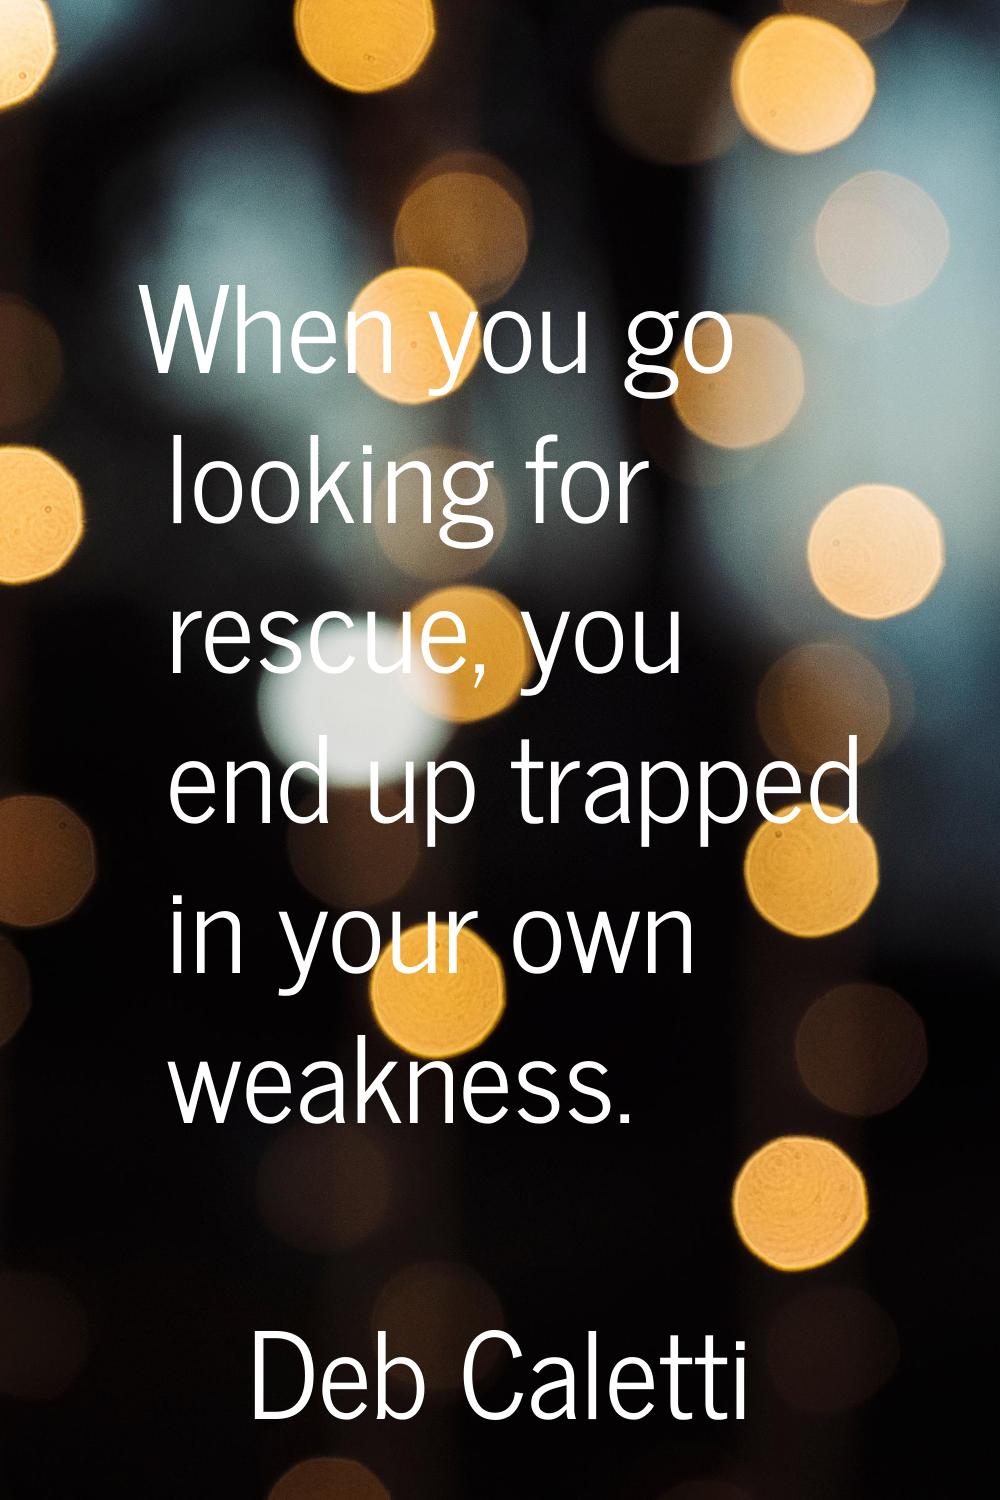 When you go looking for rescue, you end up trapped in your own weakness.